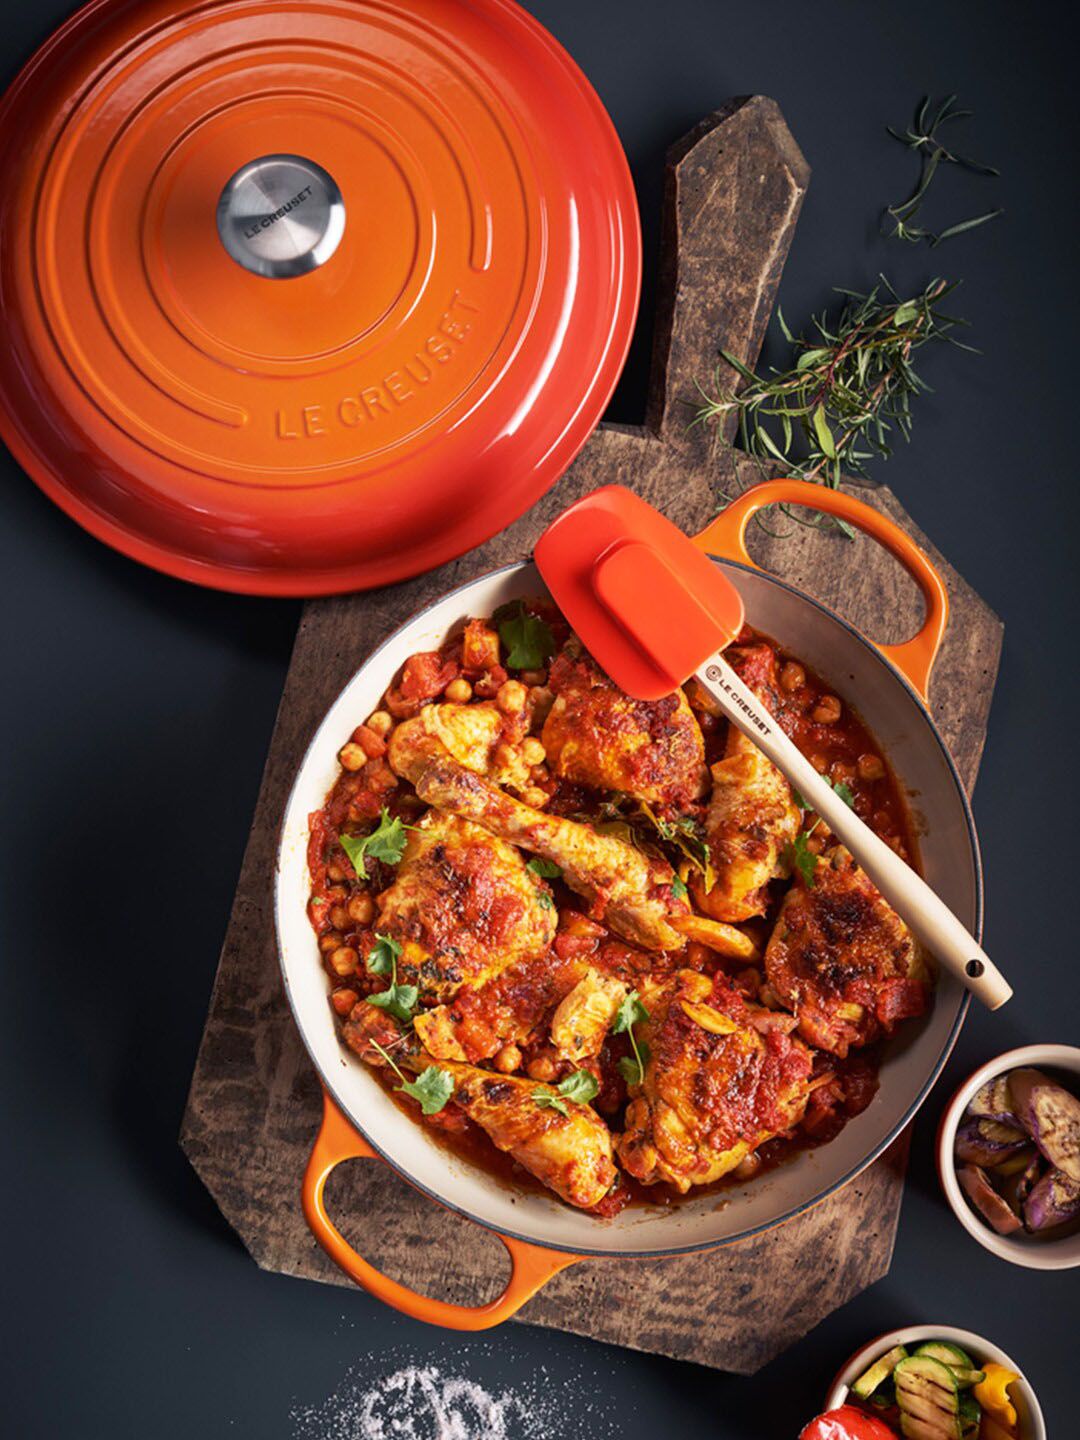 LE CREUSET Orange & Silver-Toned Solid Wok With Glass Lid Price in India